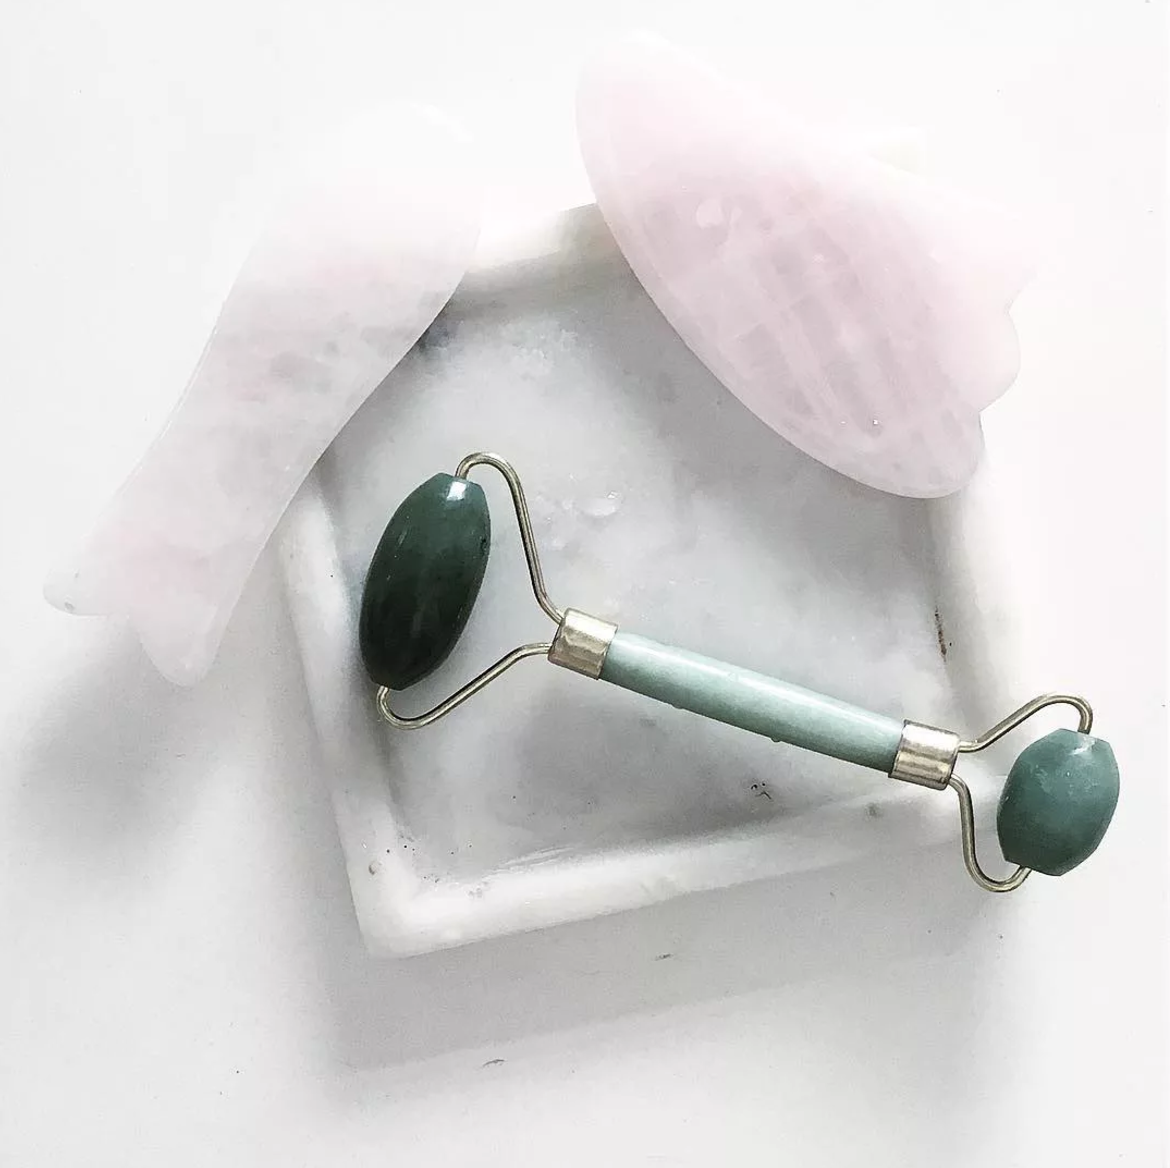 WHAT IS A JADE ROLLER?